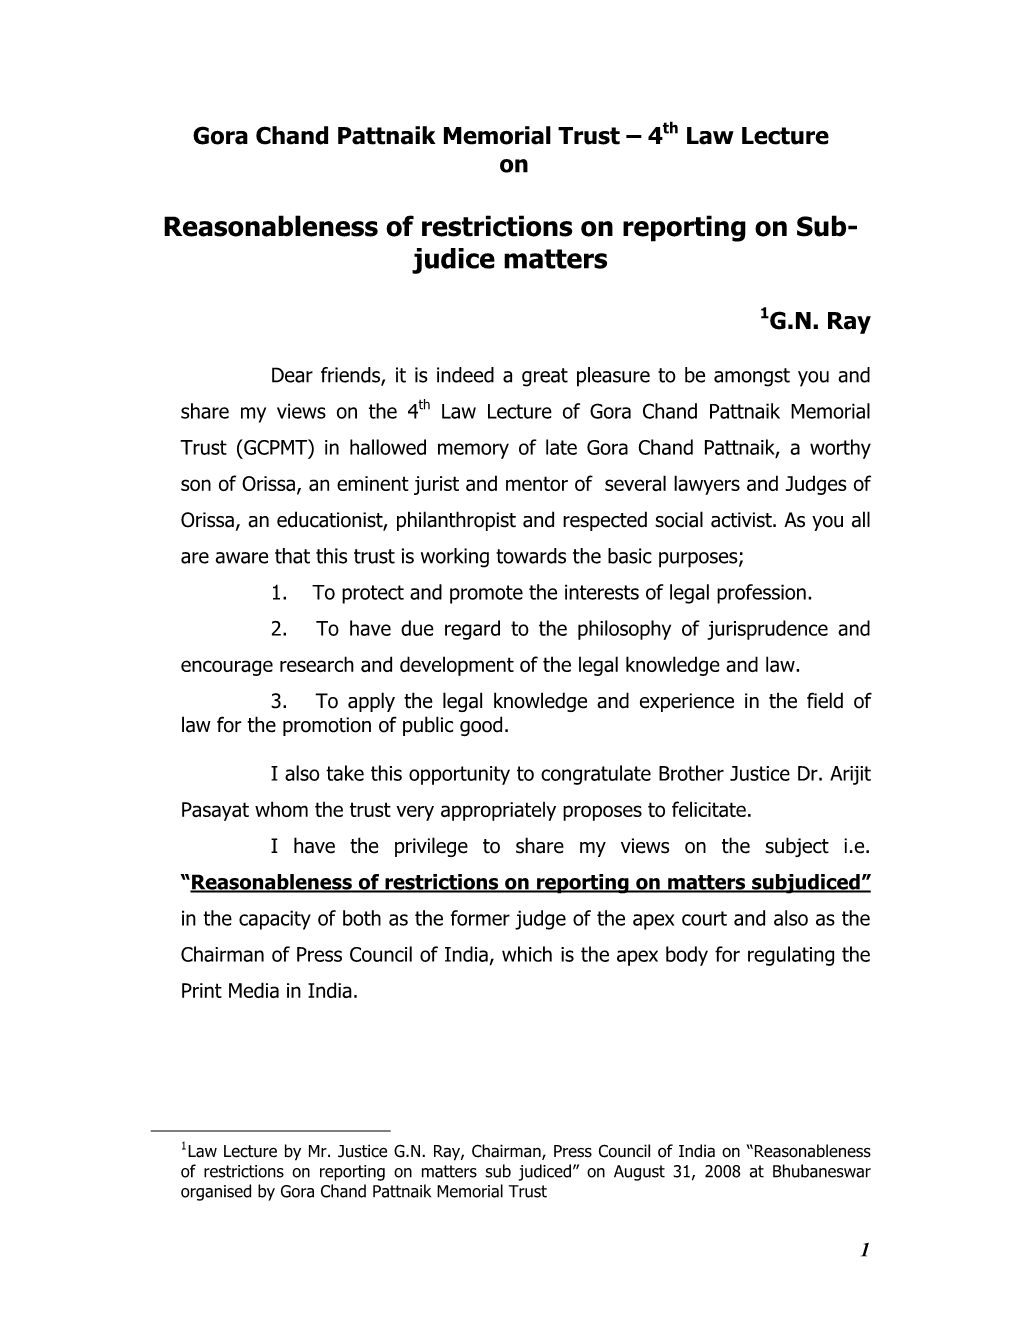 Reasonableness of Restrictions on Reporting on Sub- Judice Matters